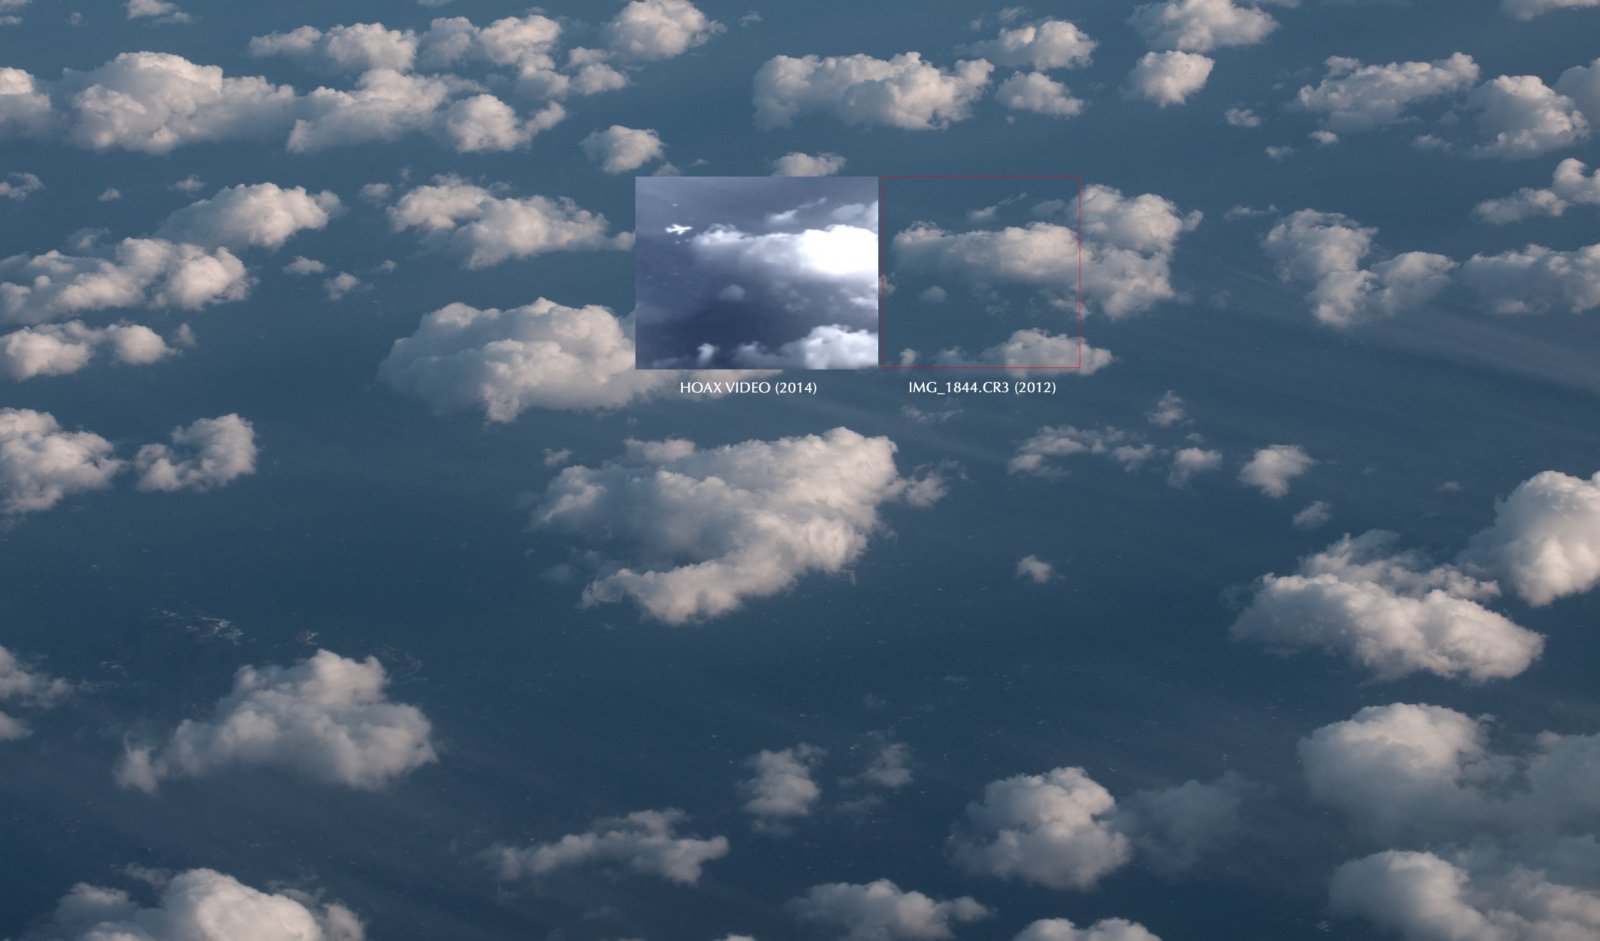 Compare mh370 wider clouds.jpg